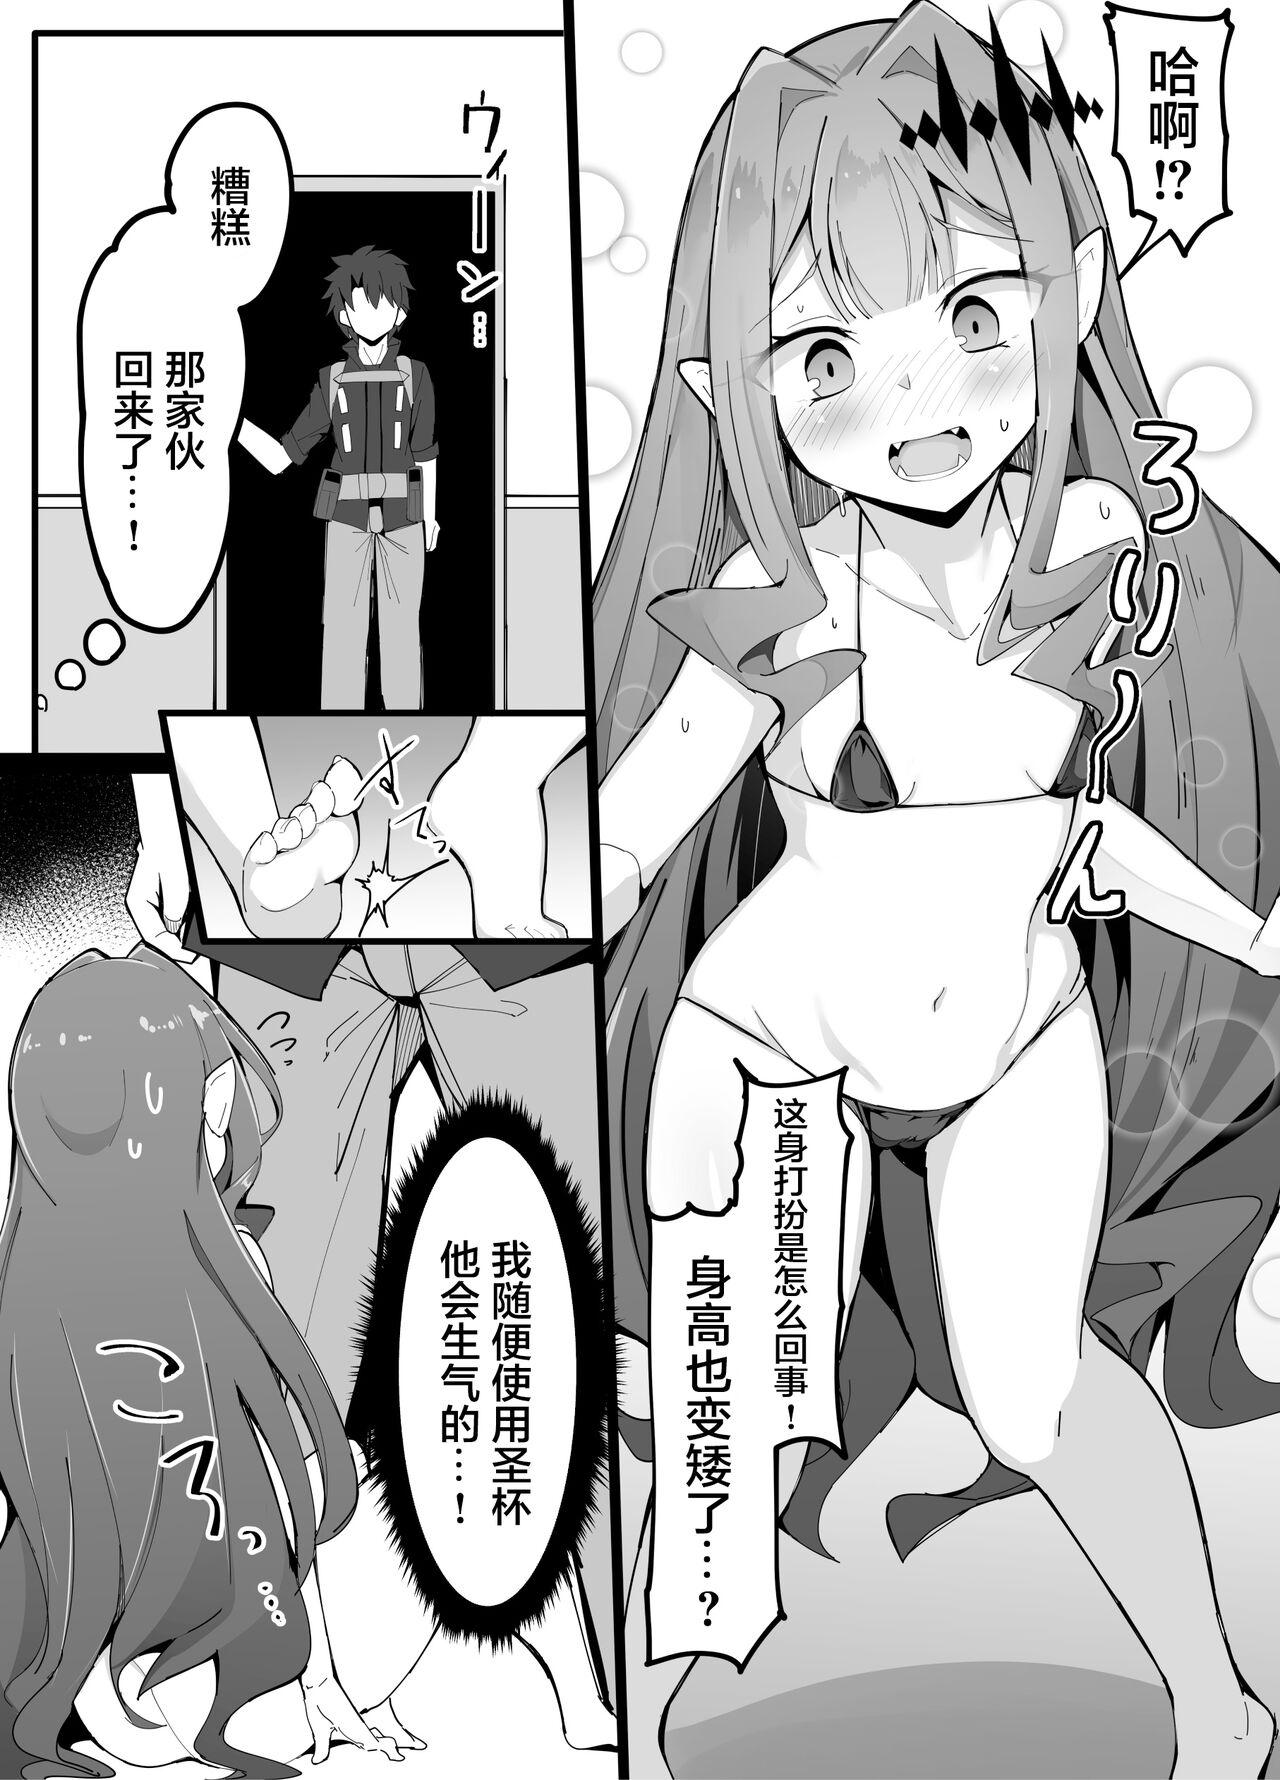 Slave 幼精騎士ロリスタン - Fate grand order Indonesian - Page 4